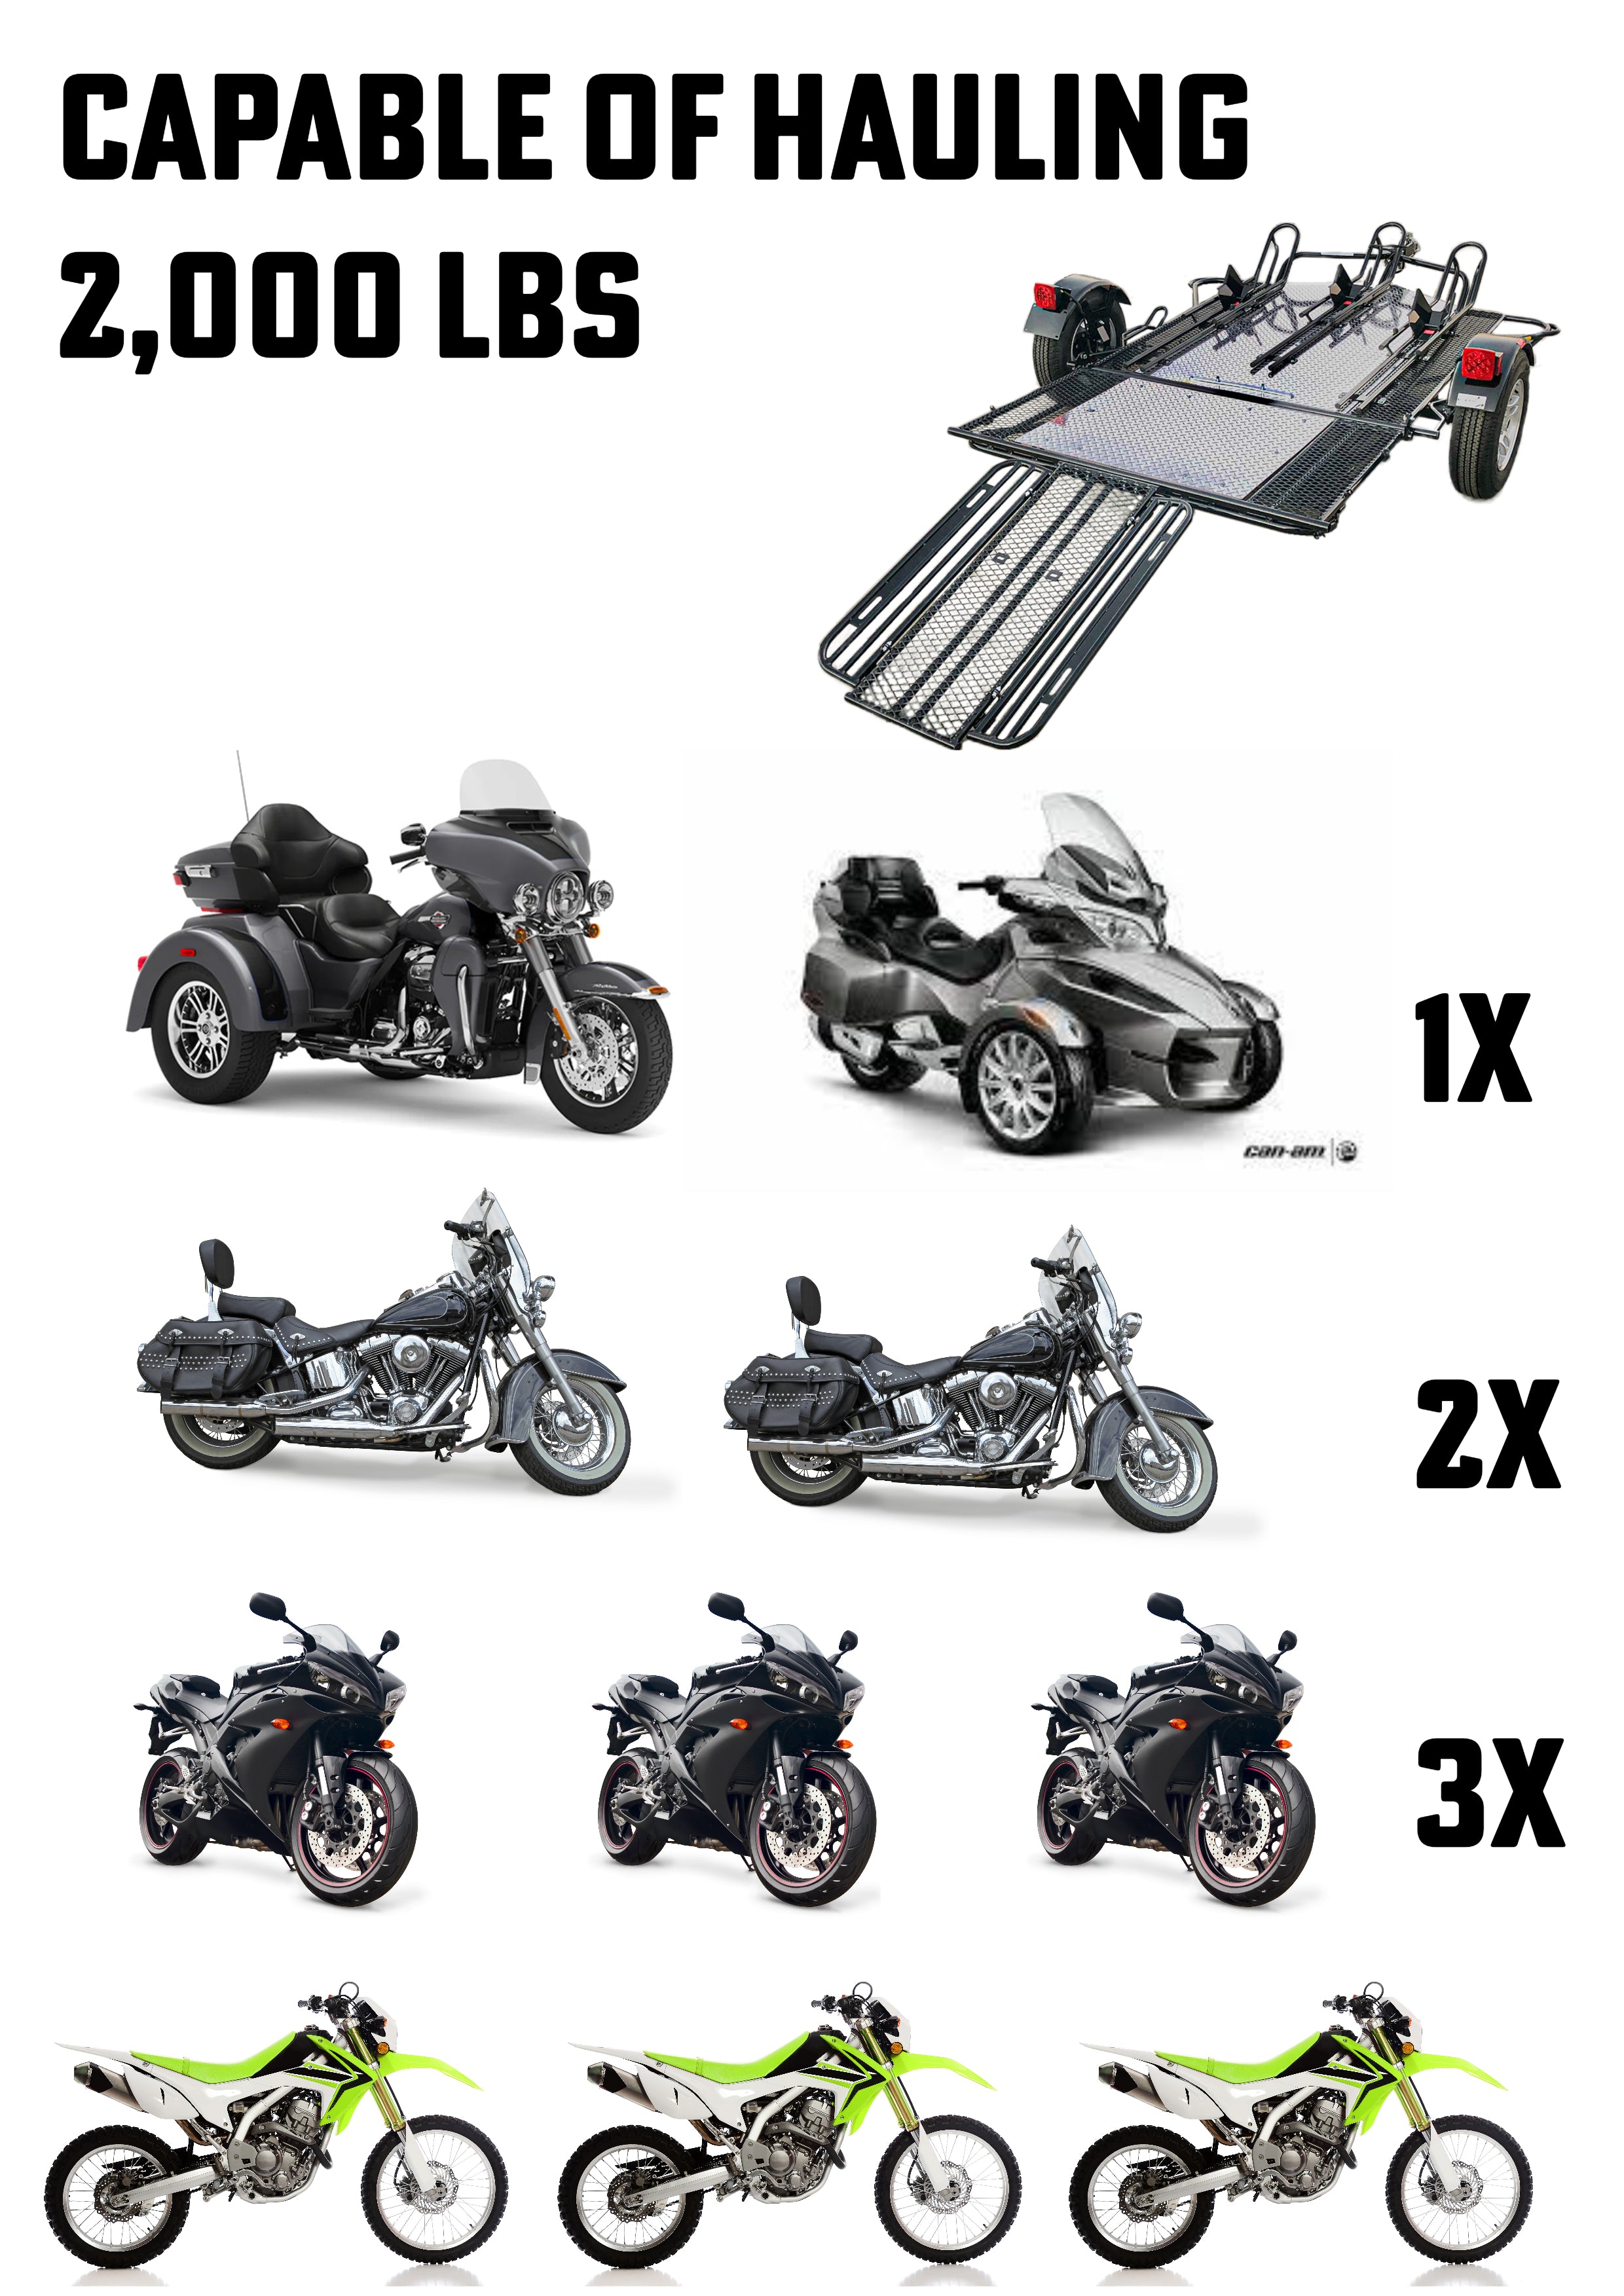 Trinity Mt3 motorcycle trailer what types of bikes can you loac